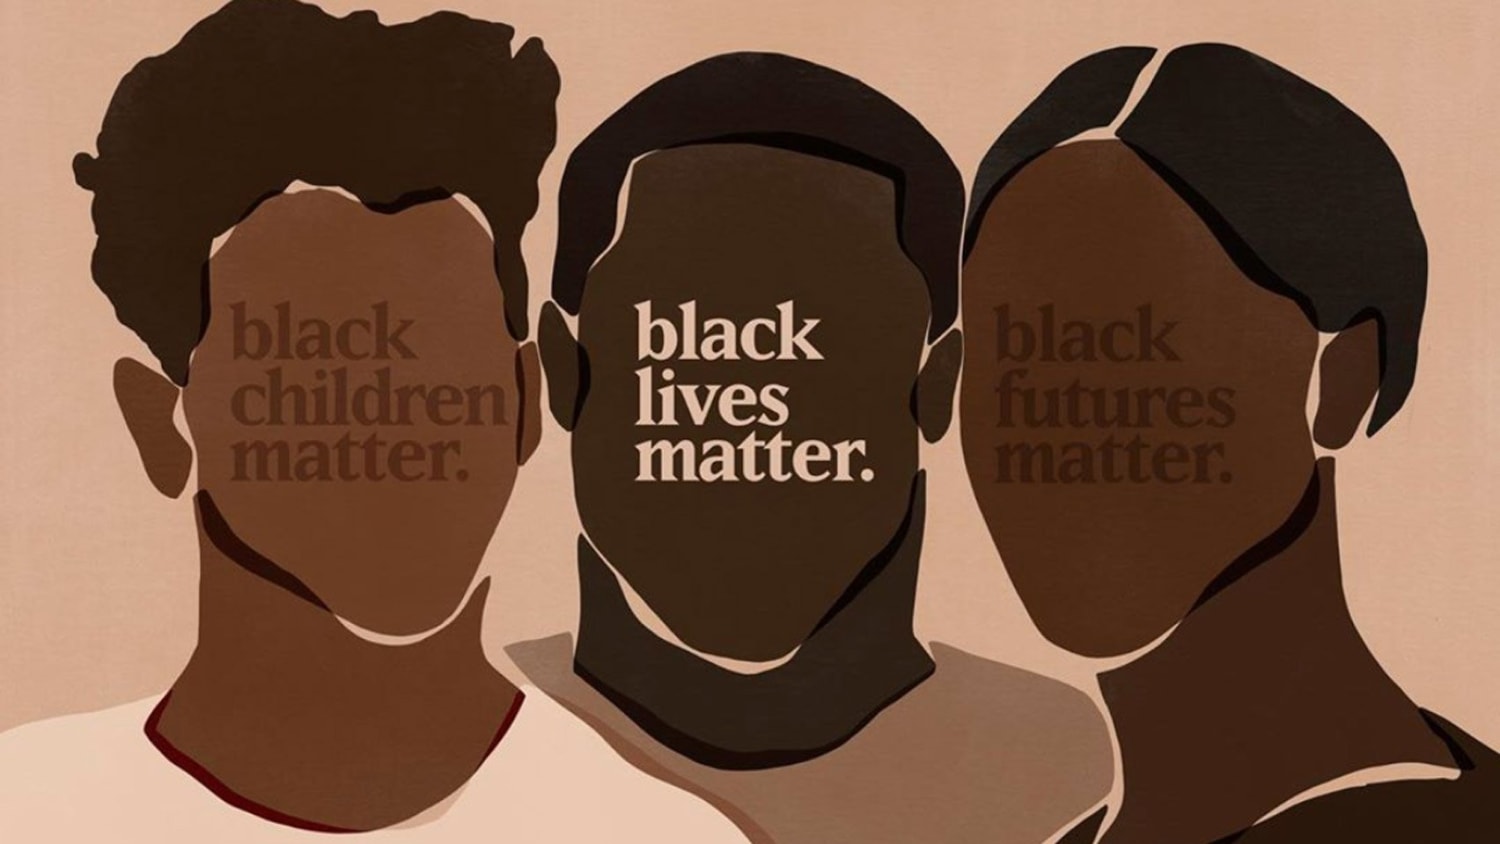 Graphic designers share illustrations in support of Black Lives Matter